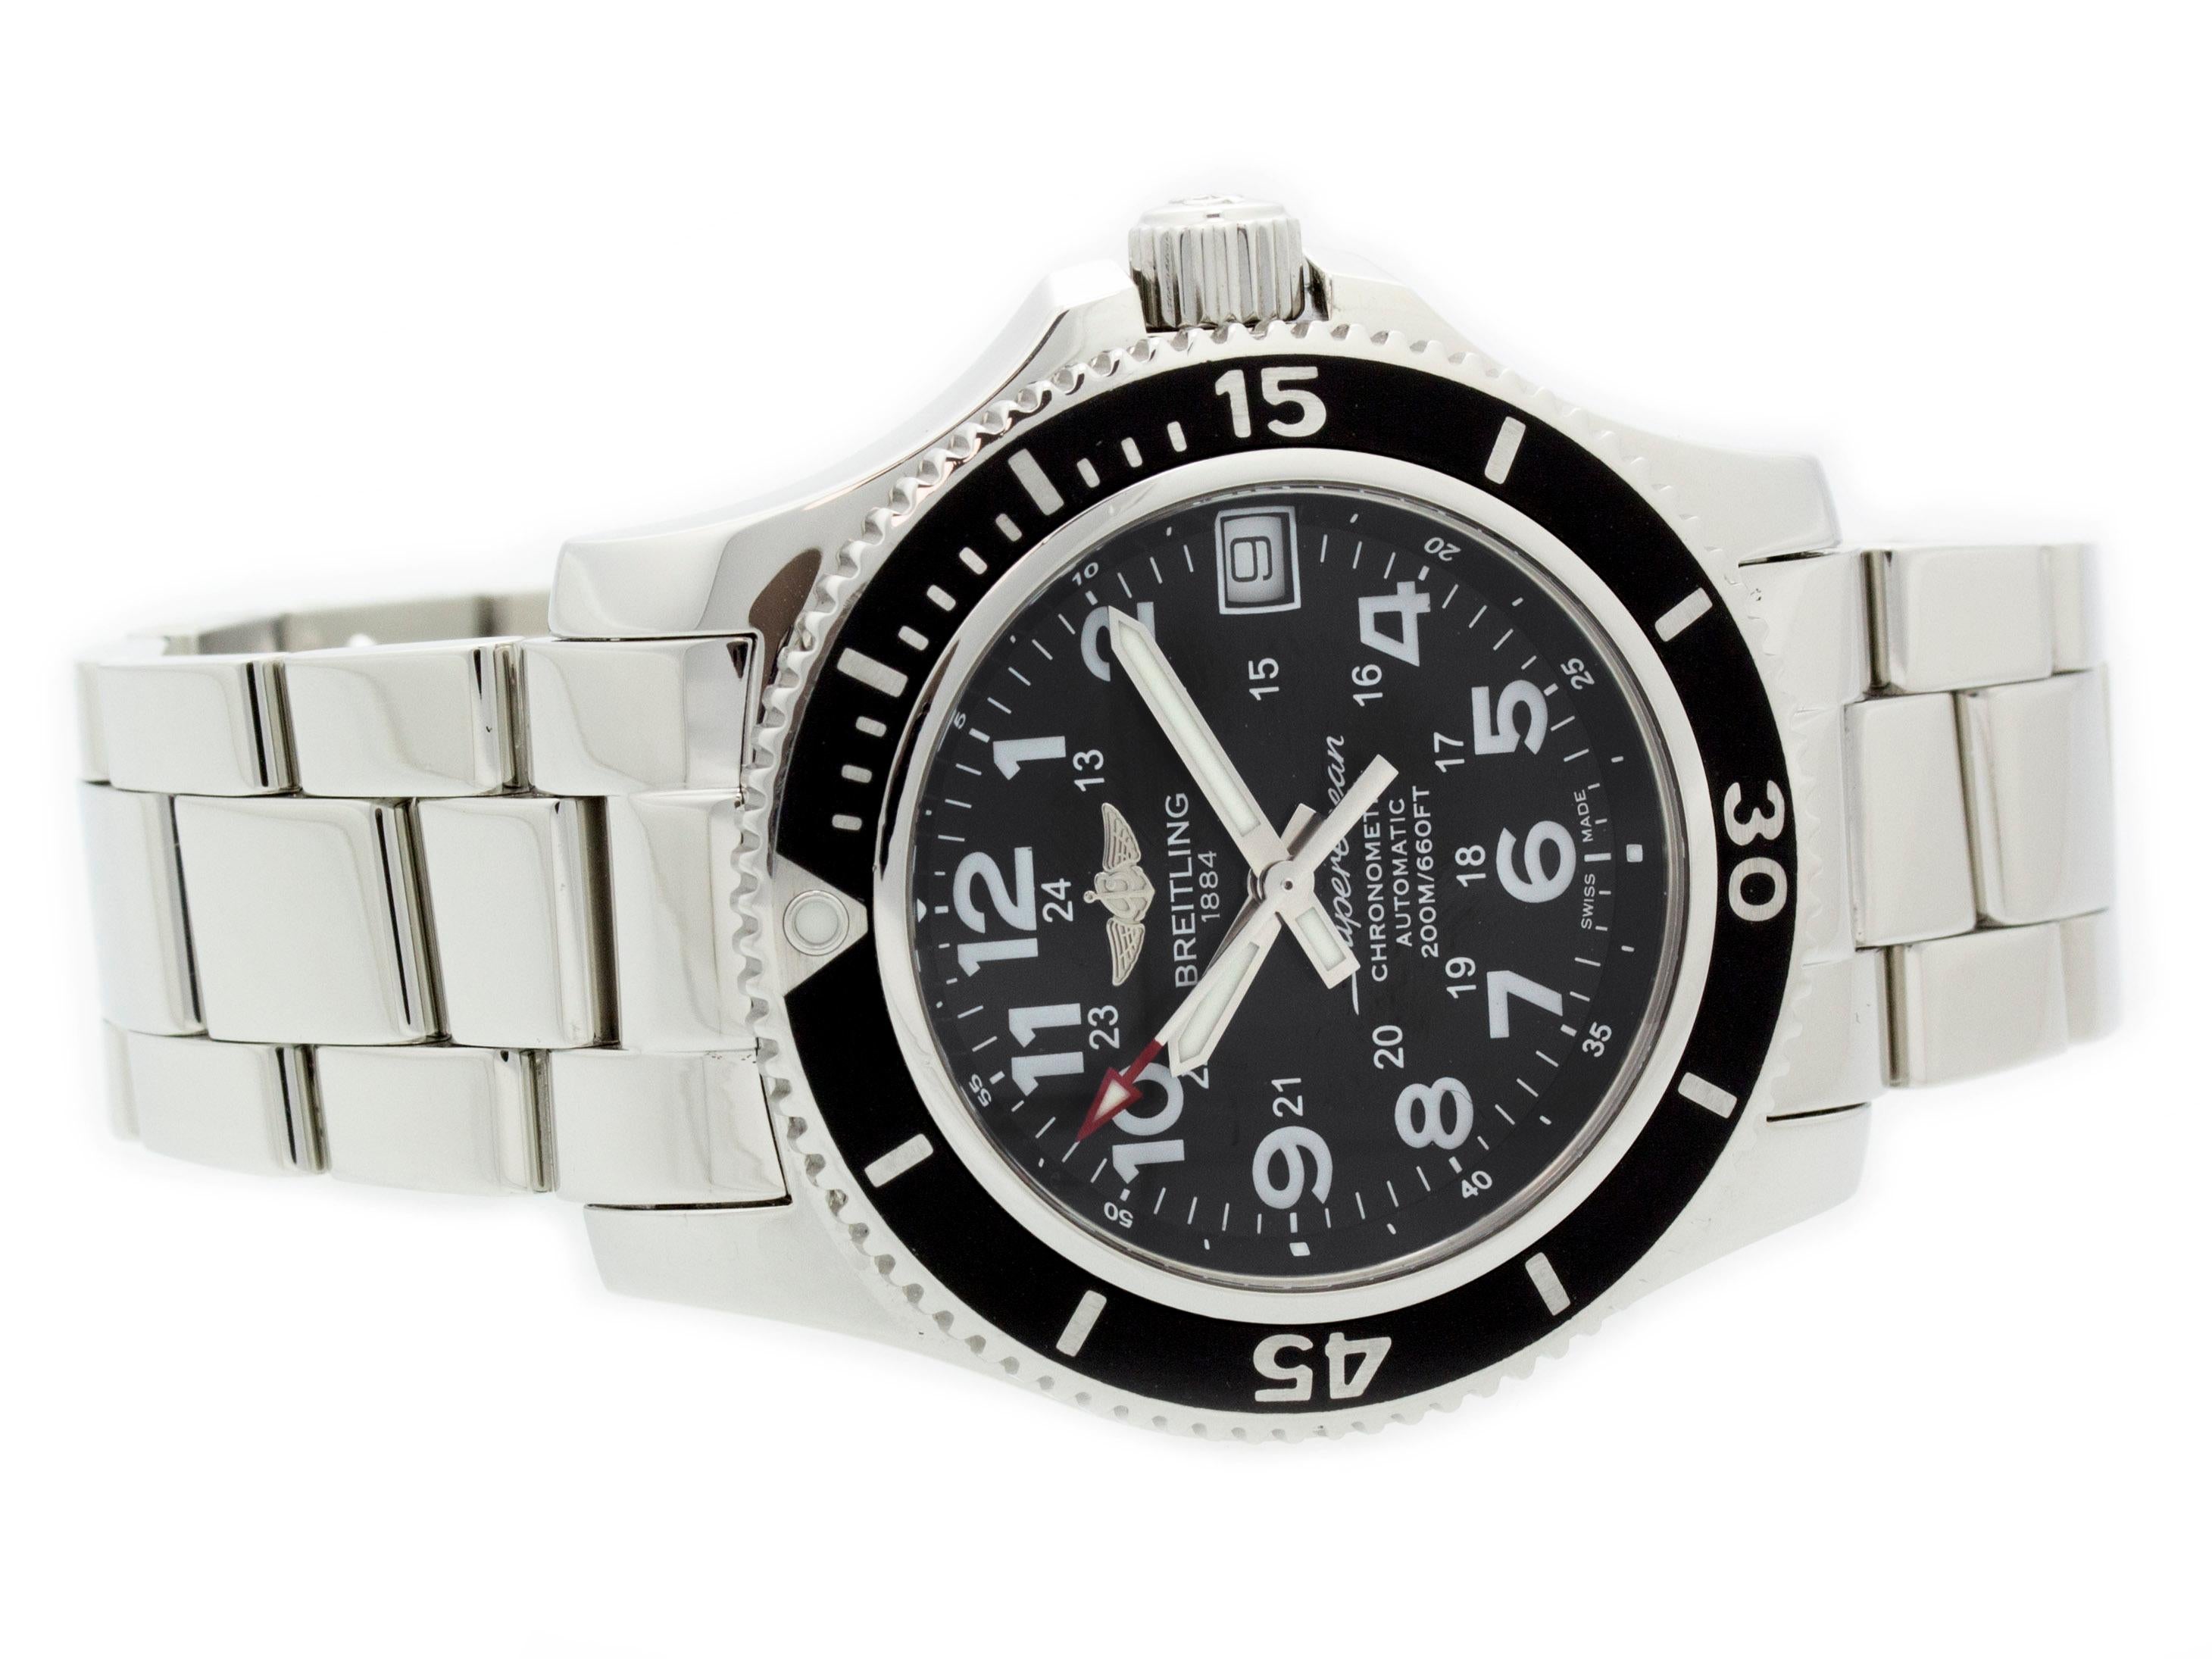 Stainless steel Breitling Superocean II automatic watch with a 36mm case, black dial, and Pro III bracelet with folding buckle. Features include hours, minutes, seconds, and date. Comes with Deluxe Gift Box and 2 Year Store Warranty.​